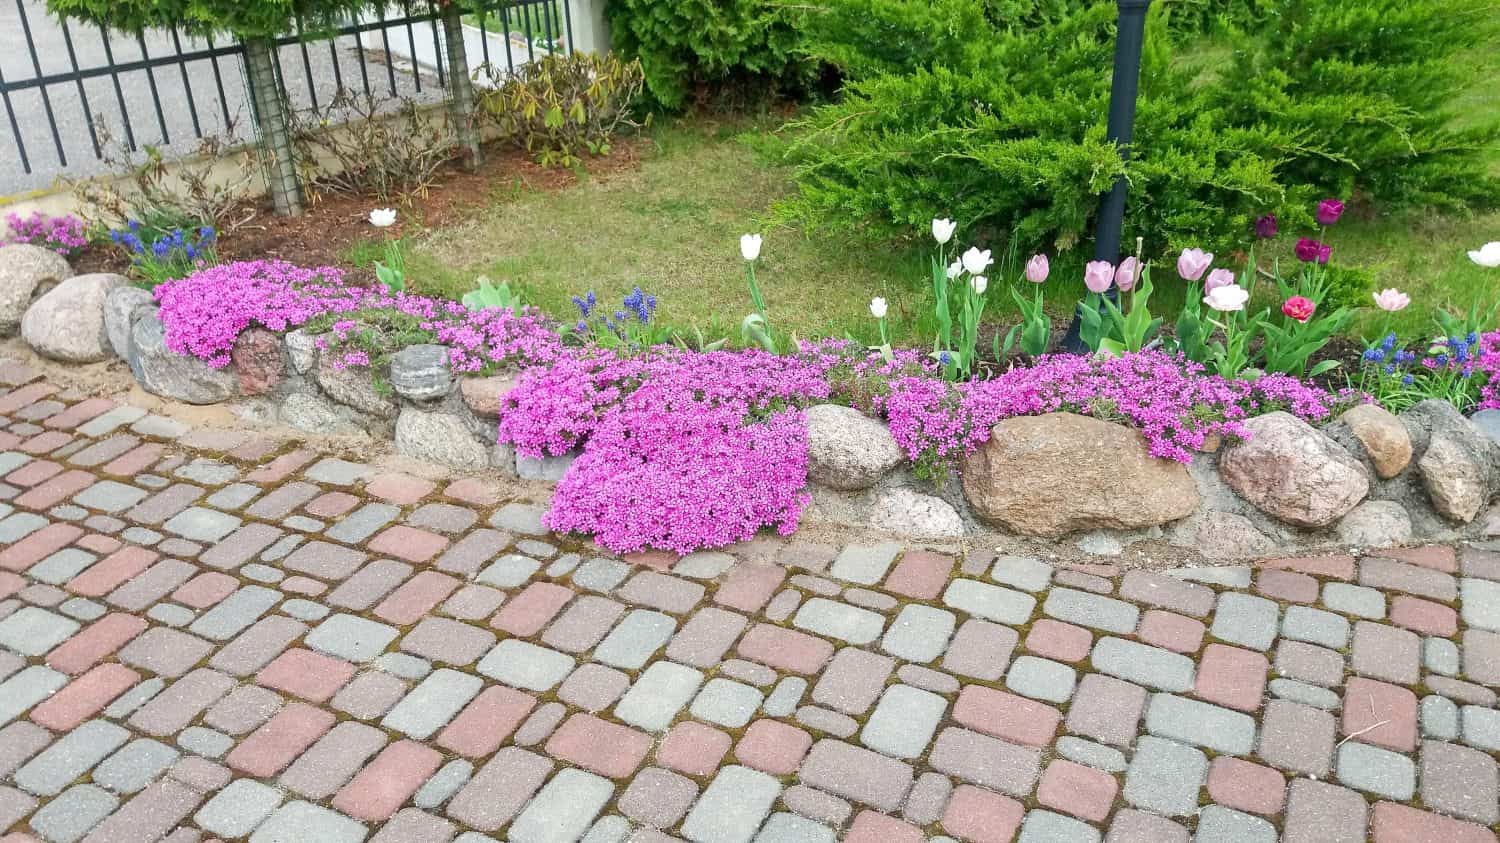 Pavement of tiles and a border of stones, overgrown with red phlox flowers